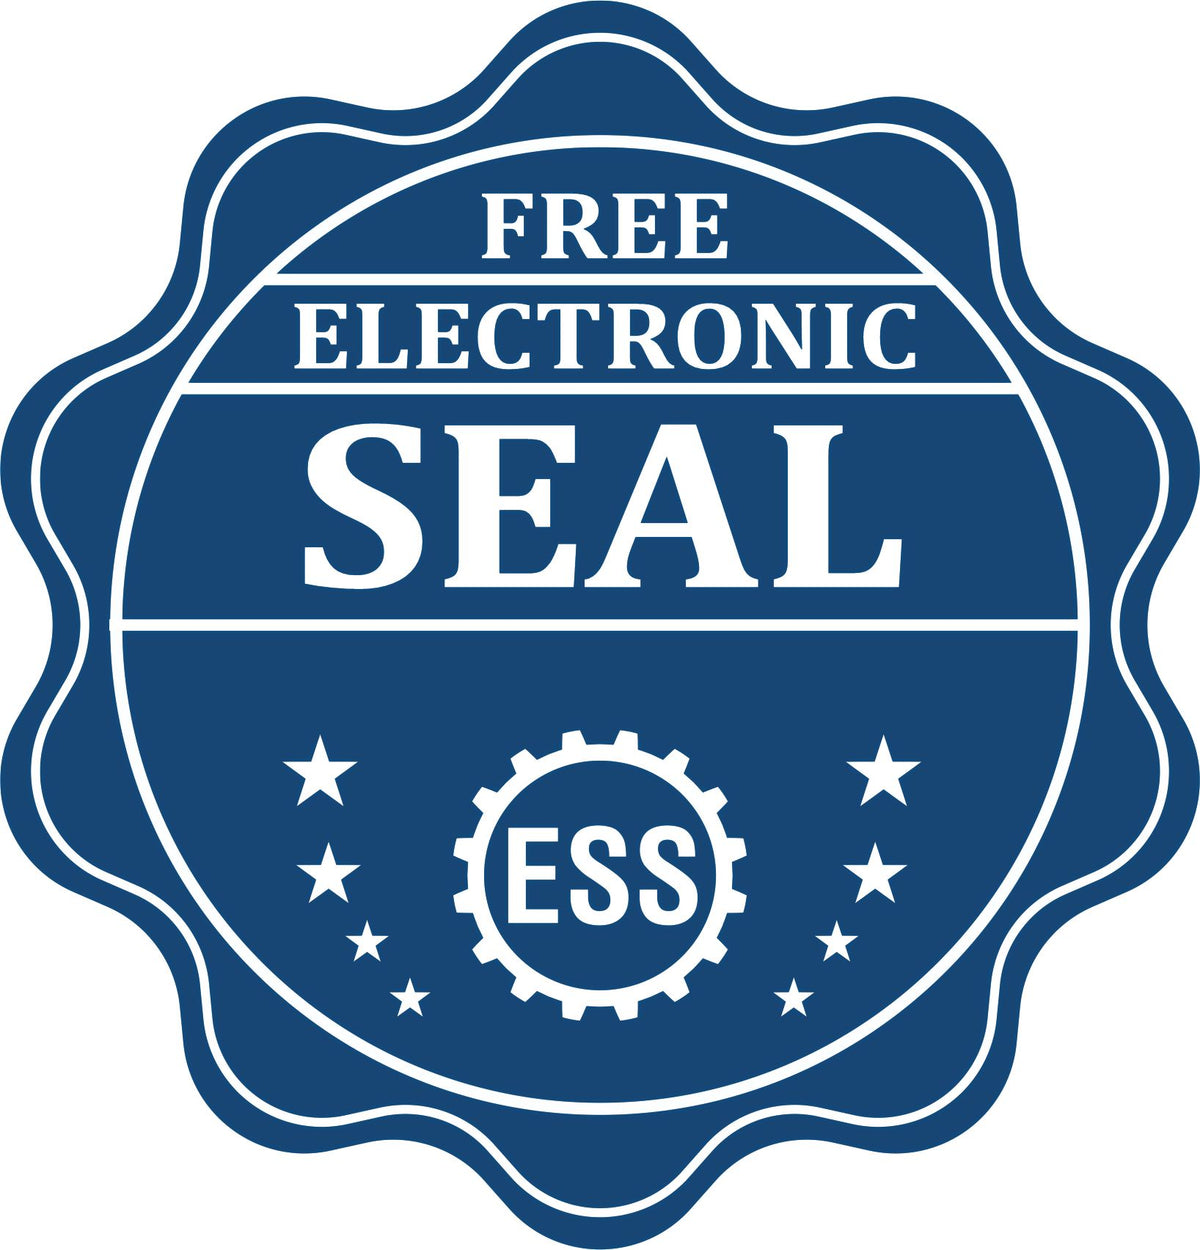 A badge showing a free electronic seal for the Soft Pocket Florida Landscape Architect Embosser with stars and the ESS gear on the emblem.